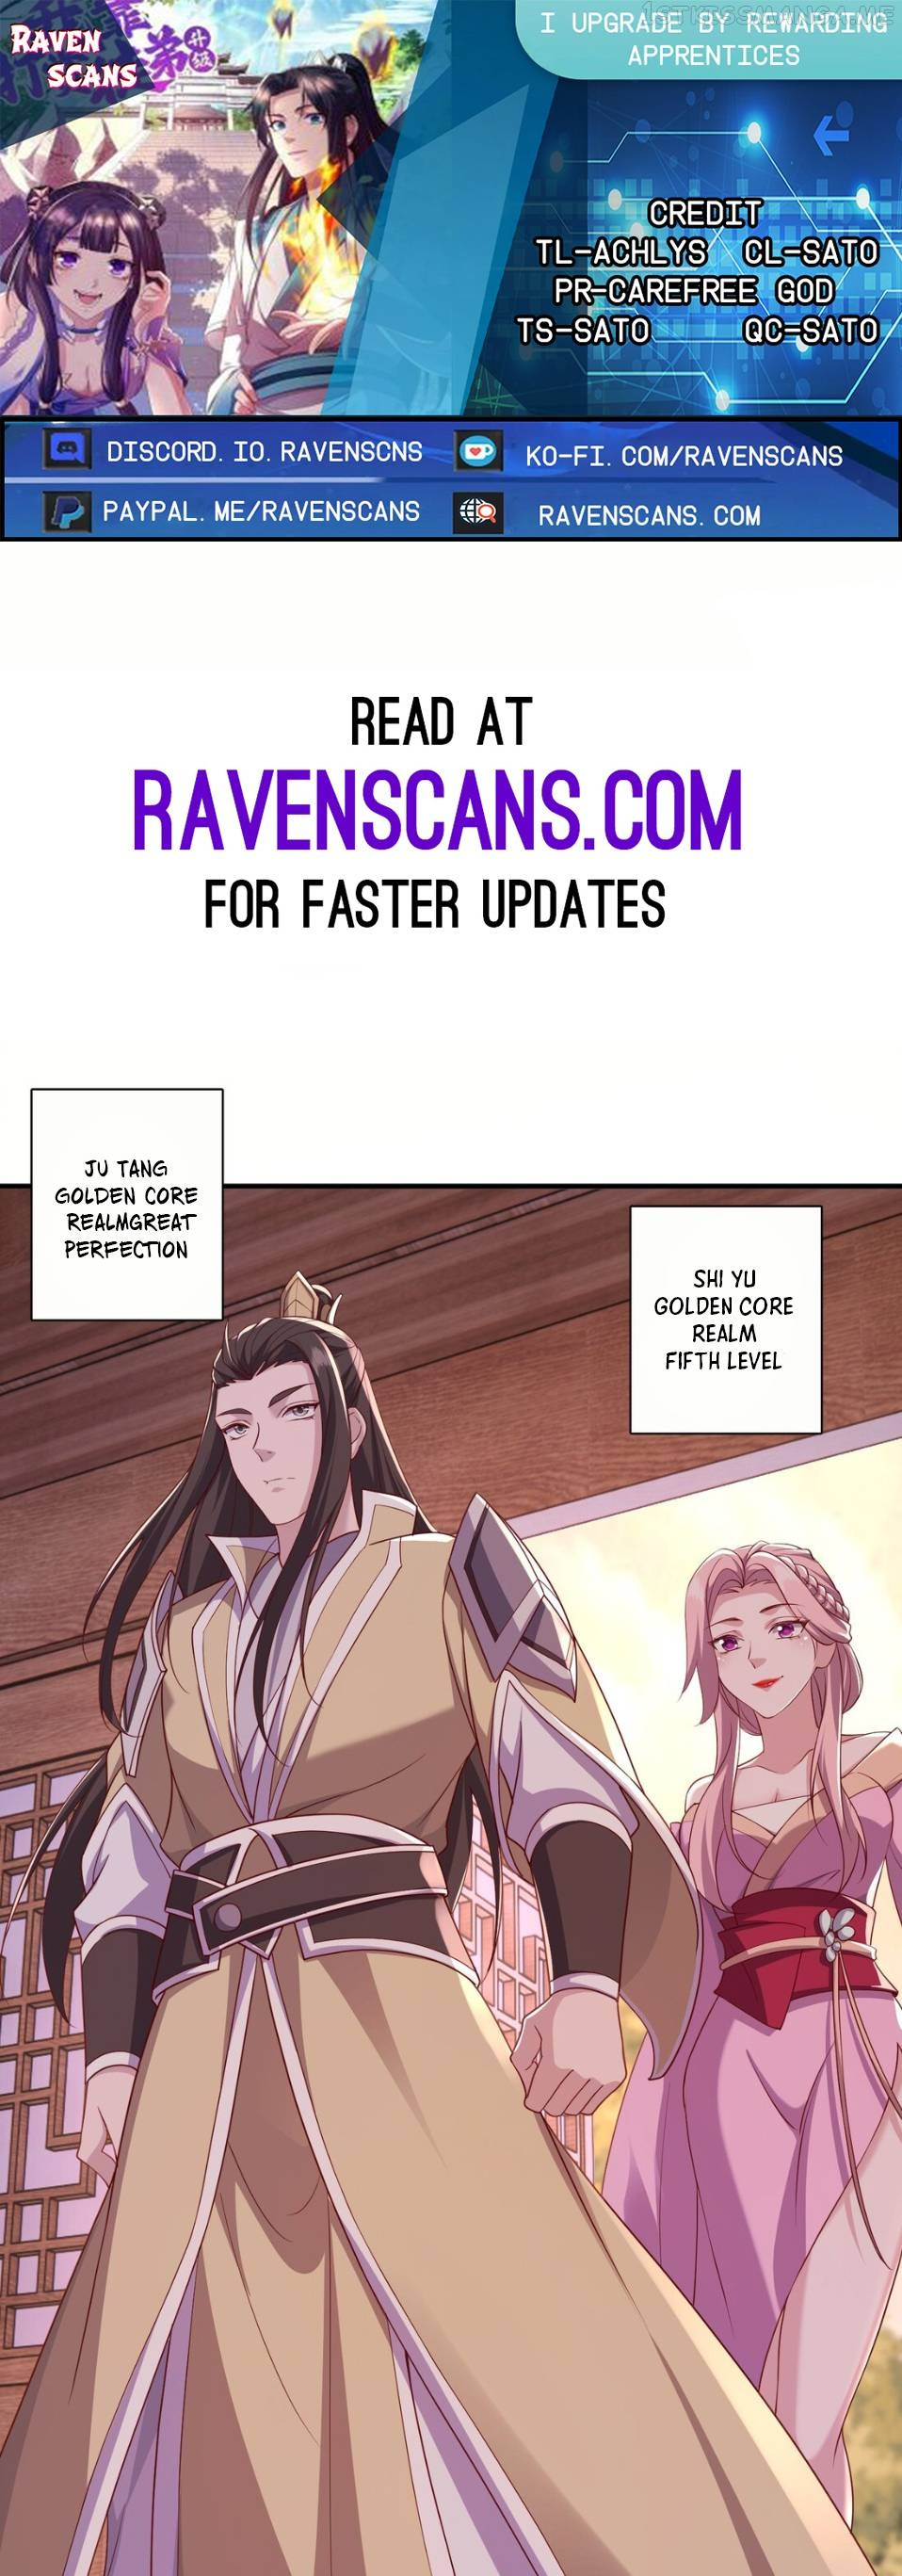 I Upgrade By Rewarding Apprentices Chapter 24 - Picture 1